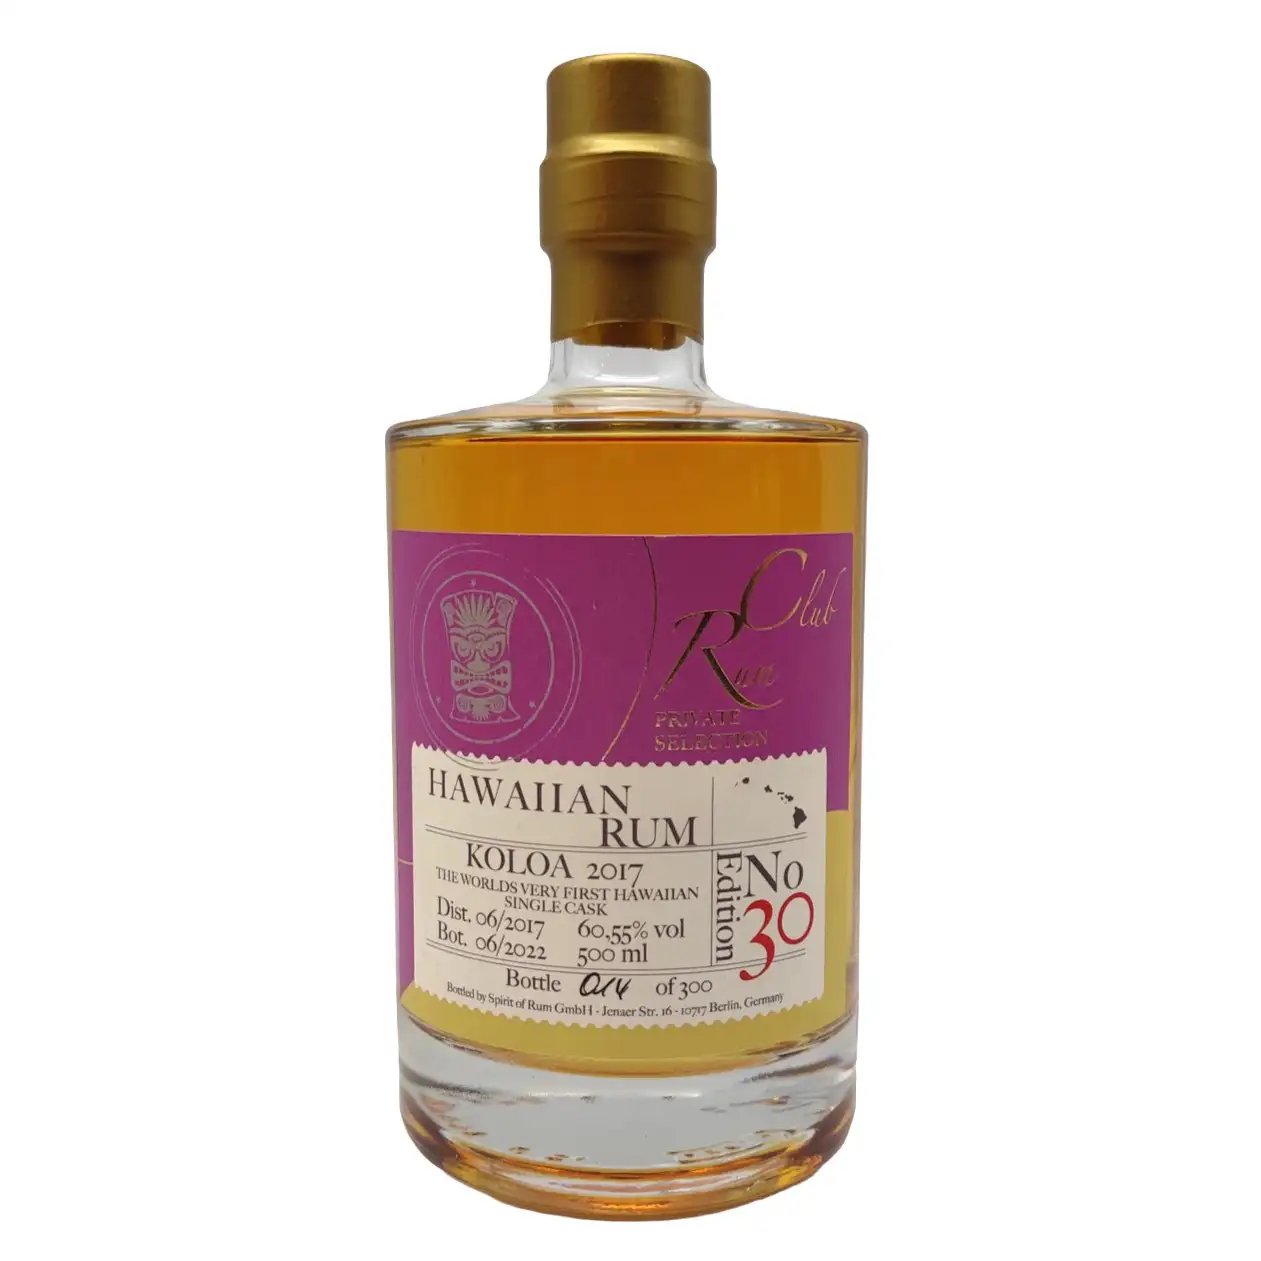 Image of the front of the bottle of the rum Rumclub Private Selection Ed. 30 (Hawaiian Rum)